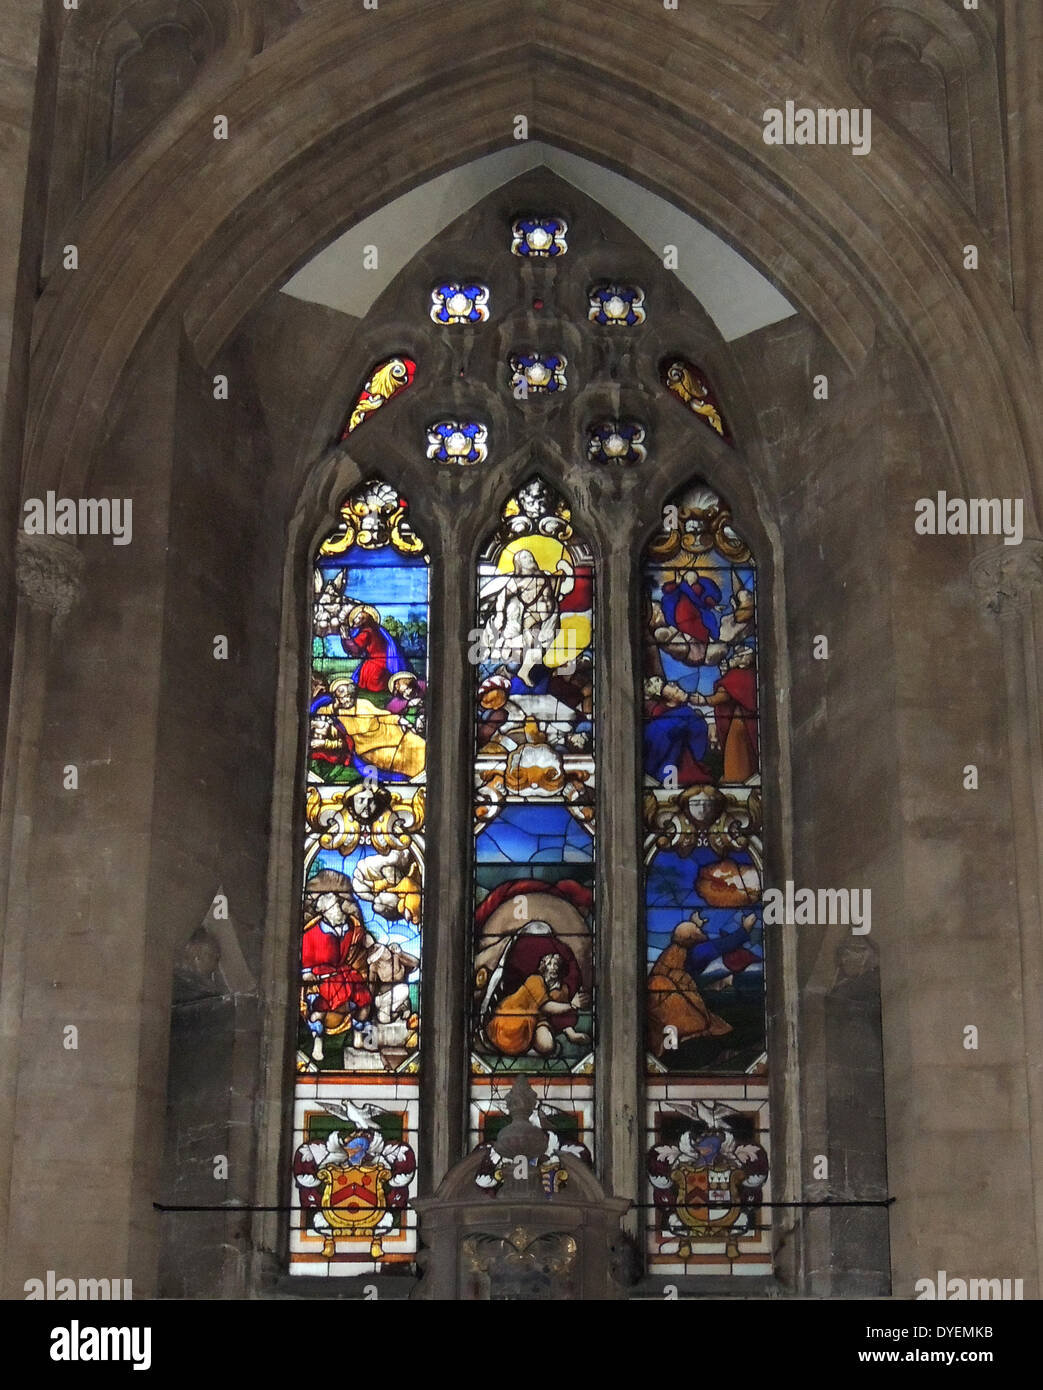 The Glemham window, stained glass window at Bristol Cathedral, England. This window was one of a pair; the other formerly to be found on the south side but of which only fragments remain after the 1940 bombing. It depicts various episodes from the bible including: Gethsemane, The Resurrection, The Transfiguration, Abraham & Isaac, Jonah swallowed by the whale, Elijah ascending to heaven in a chariot and at the bottom the Coats of arms of the Glemham family and their alliances. Stock Photo